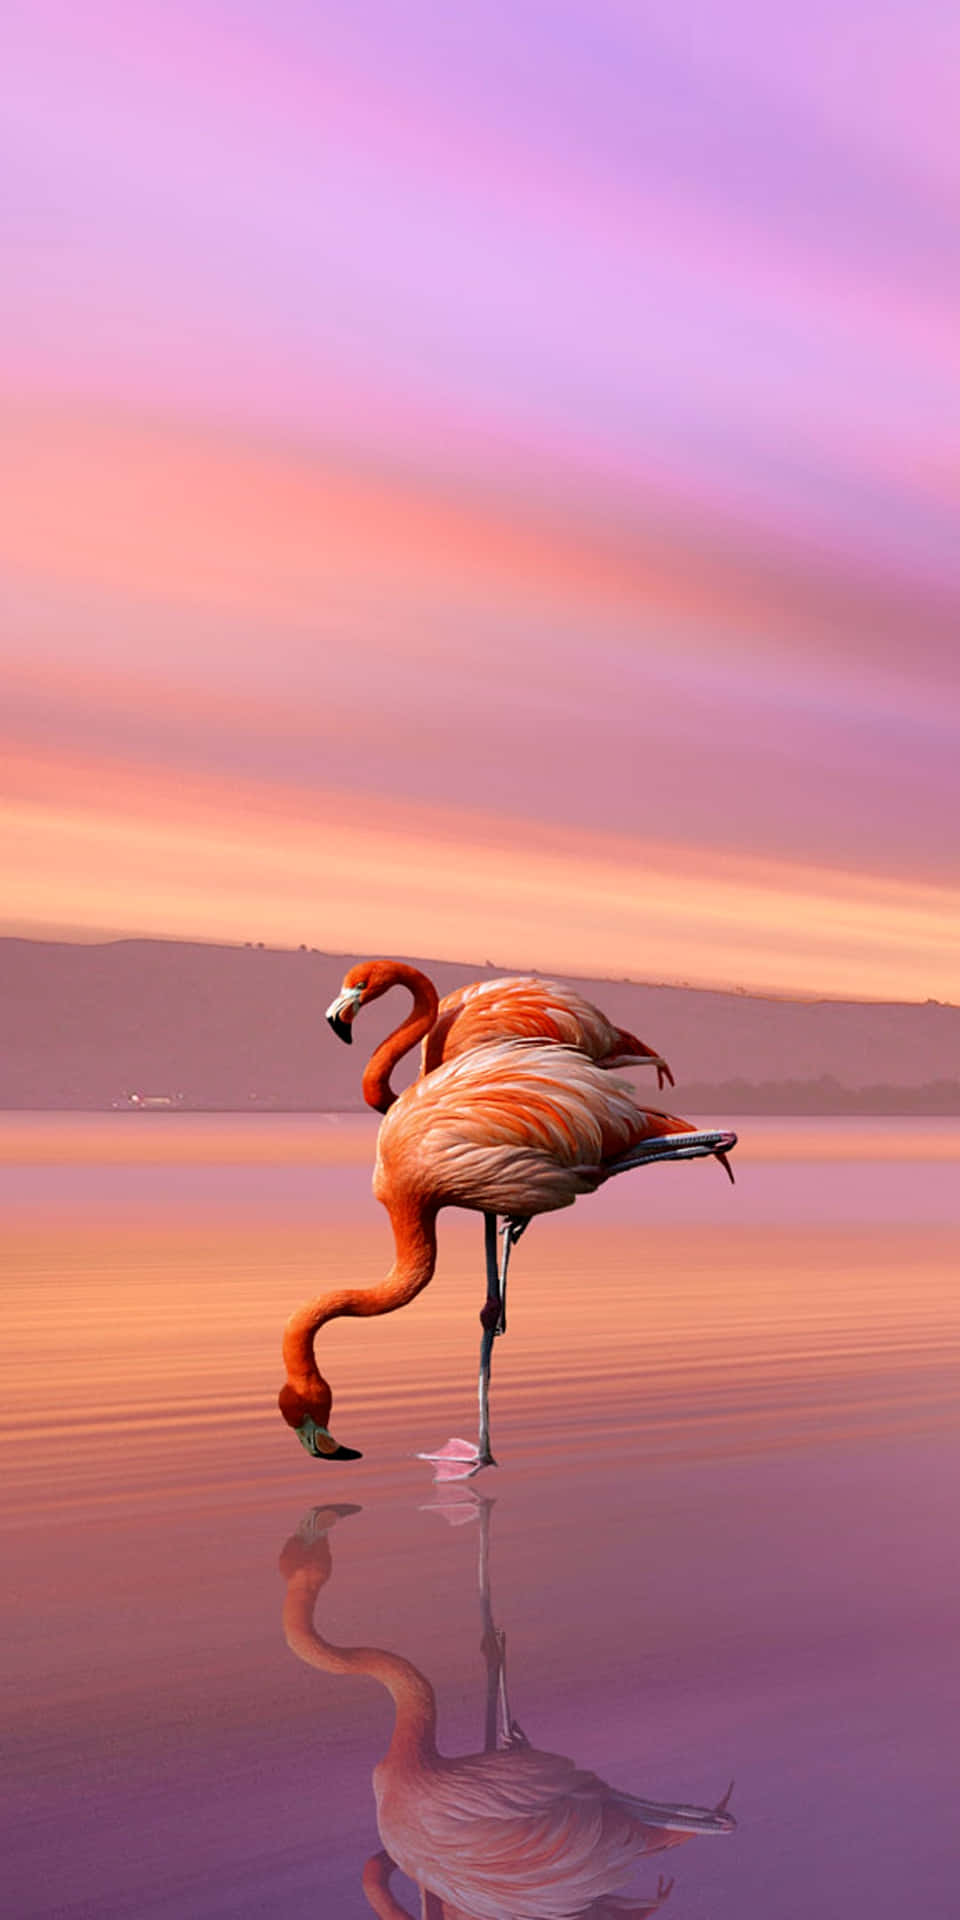 An unusually pink-hued, solitary Flamingo stands among the marshy waters - a captivating sight. Wallpaper